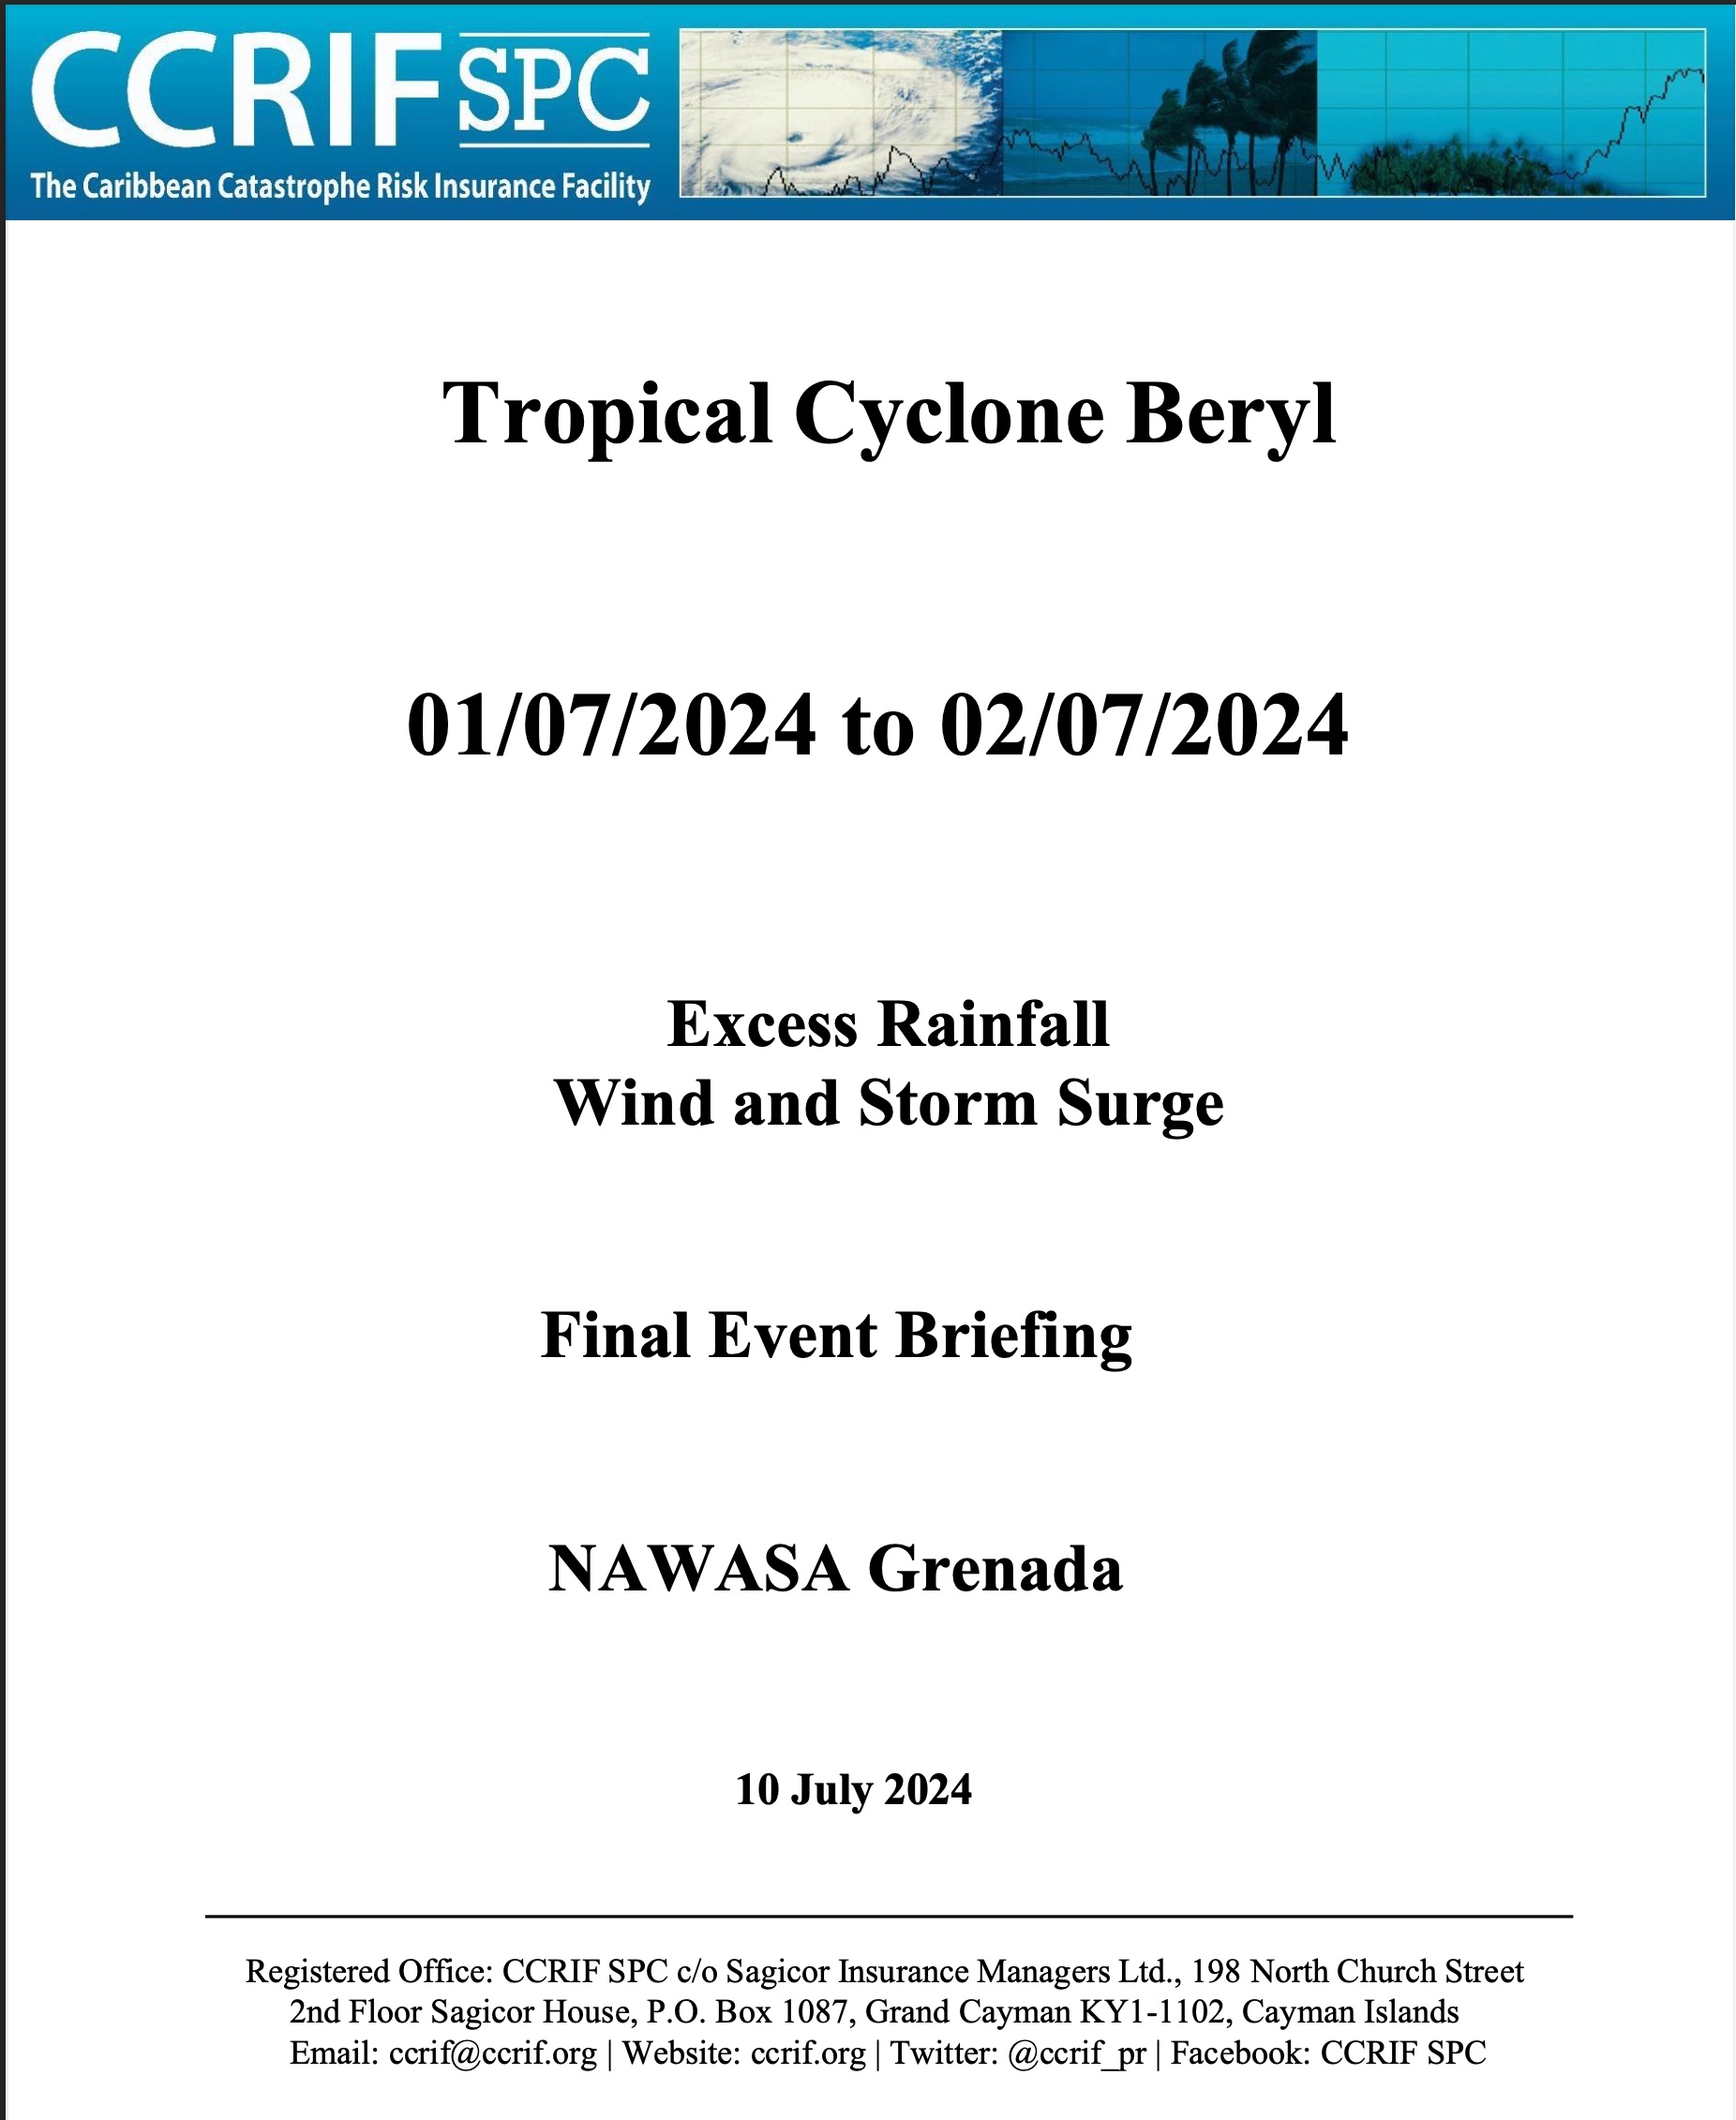 Final Event Briefing - TC Beryl - Excess Rainfall, Wind and Storm Surge - NAWASA Grenada - July 10, 2024